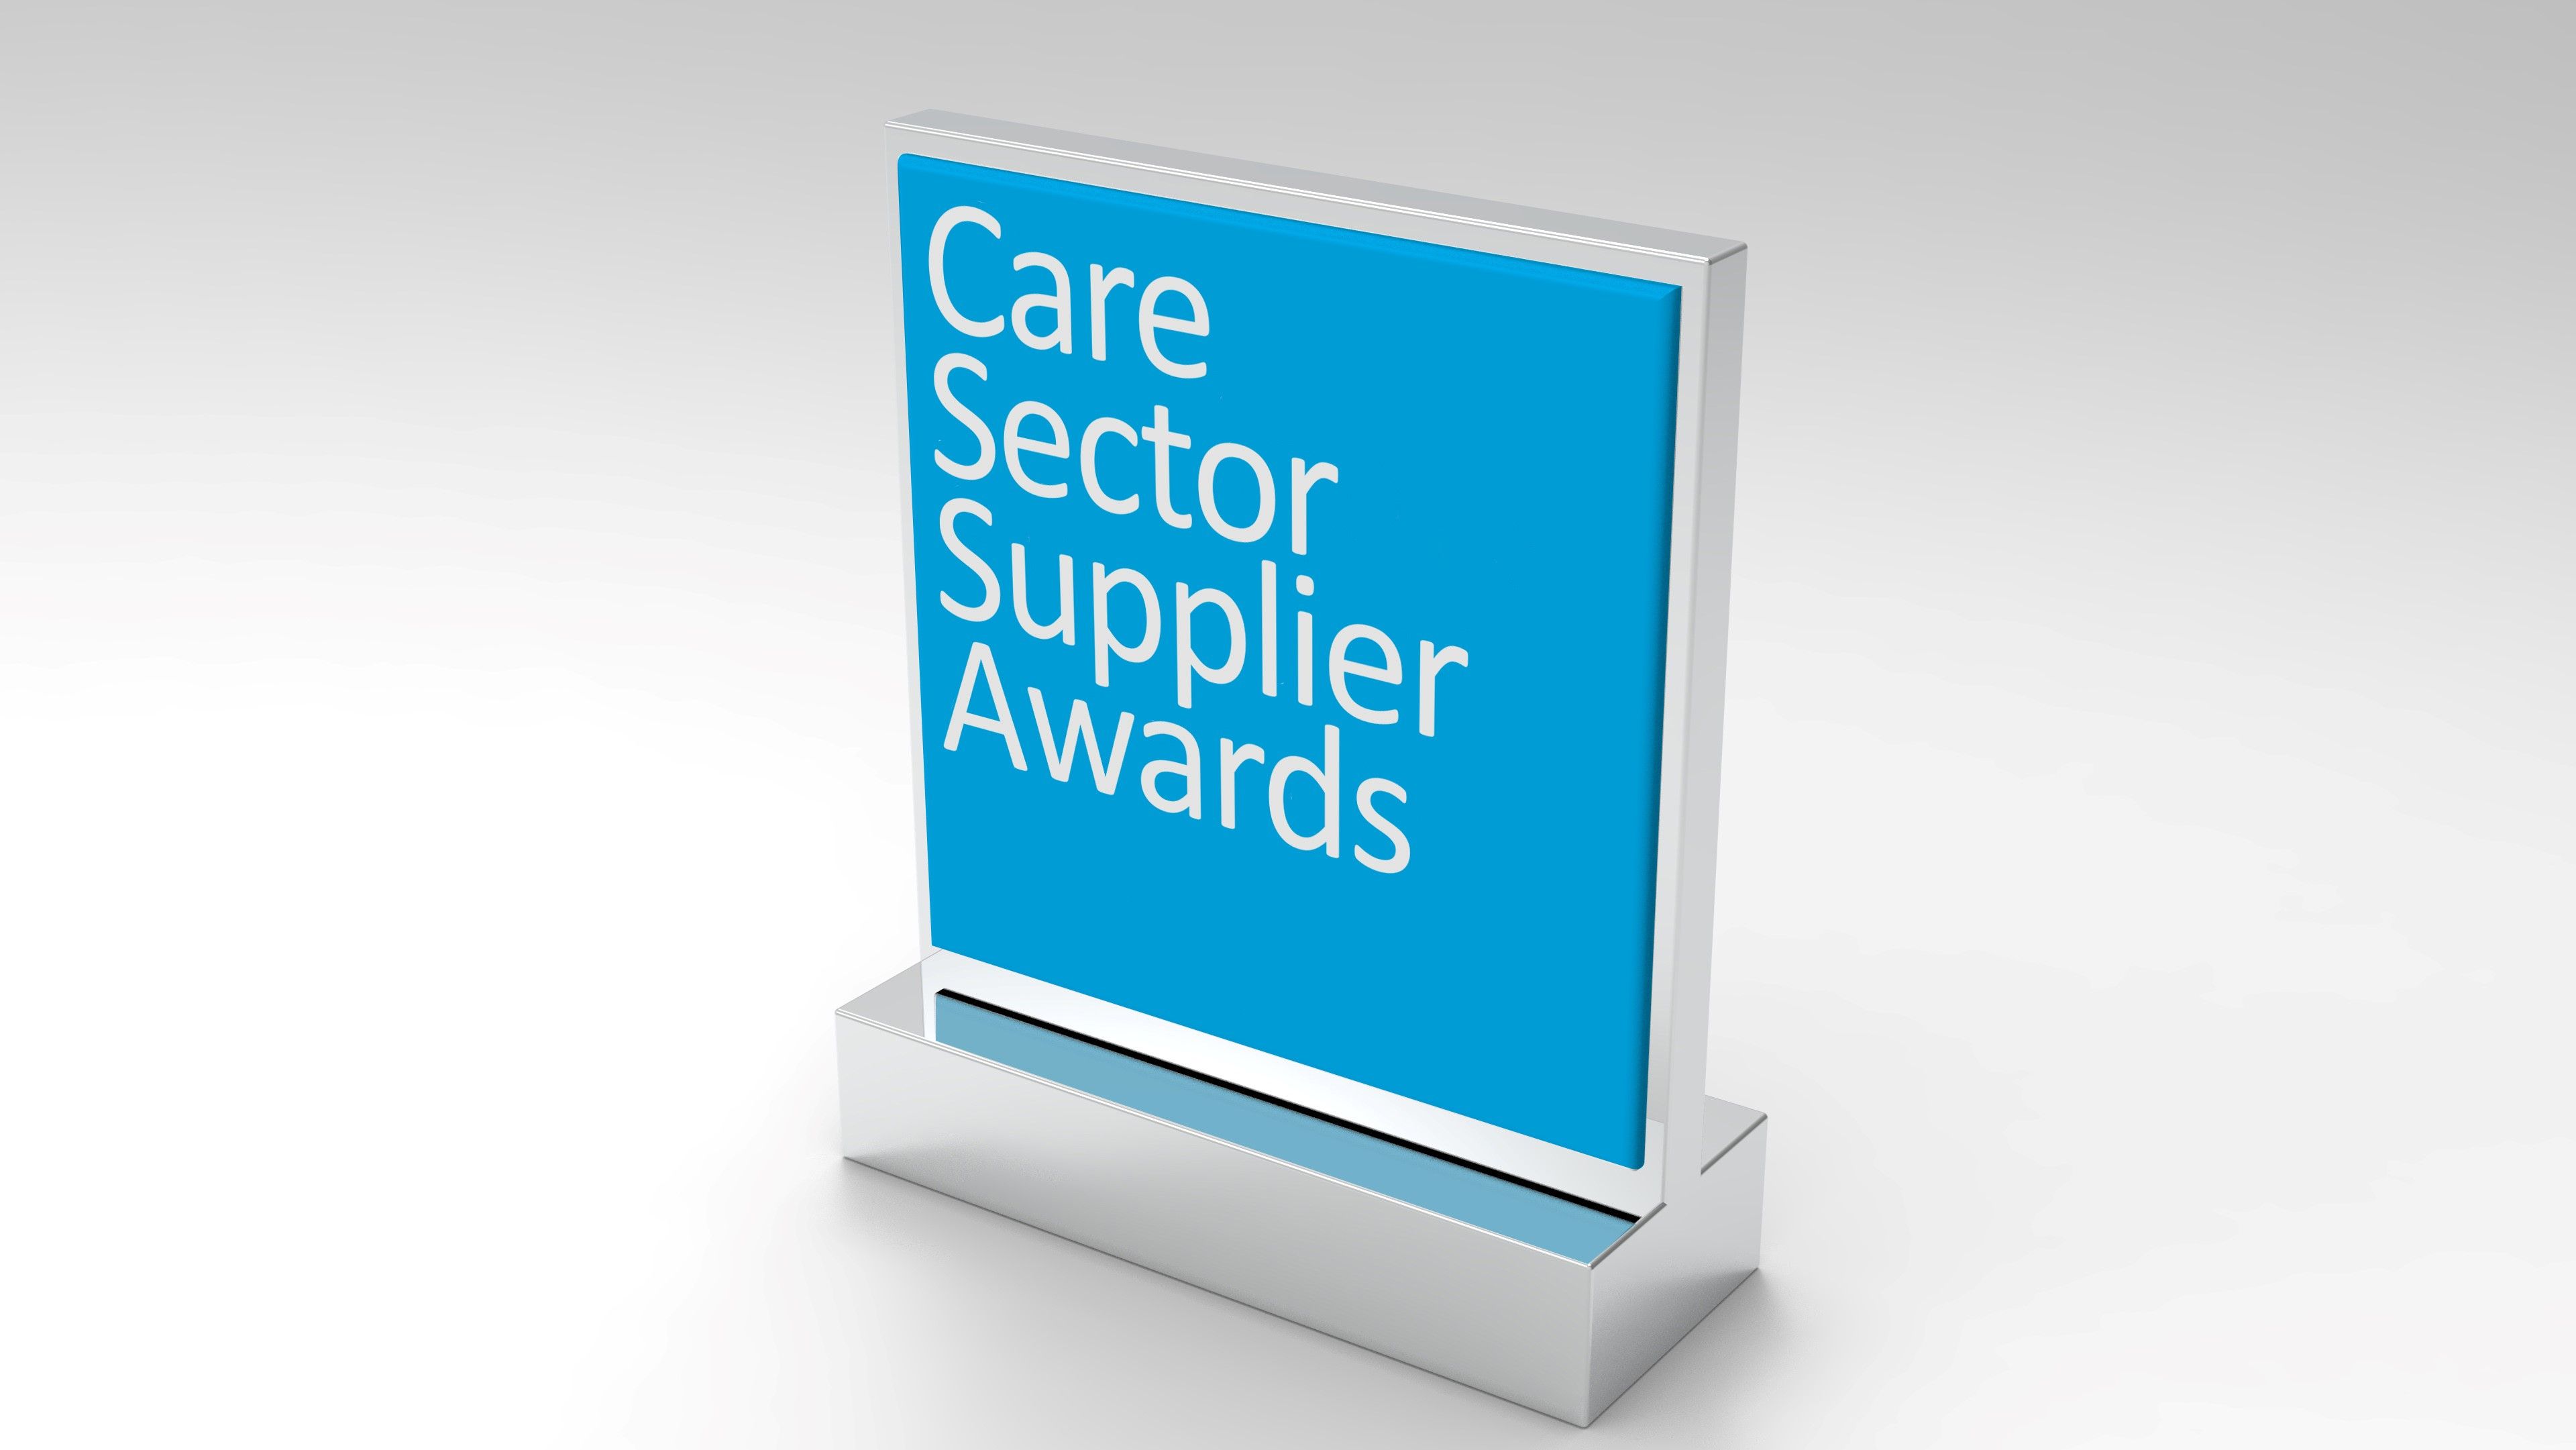 Care Sector Supplier Awards